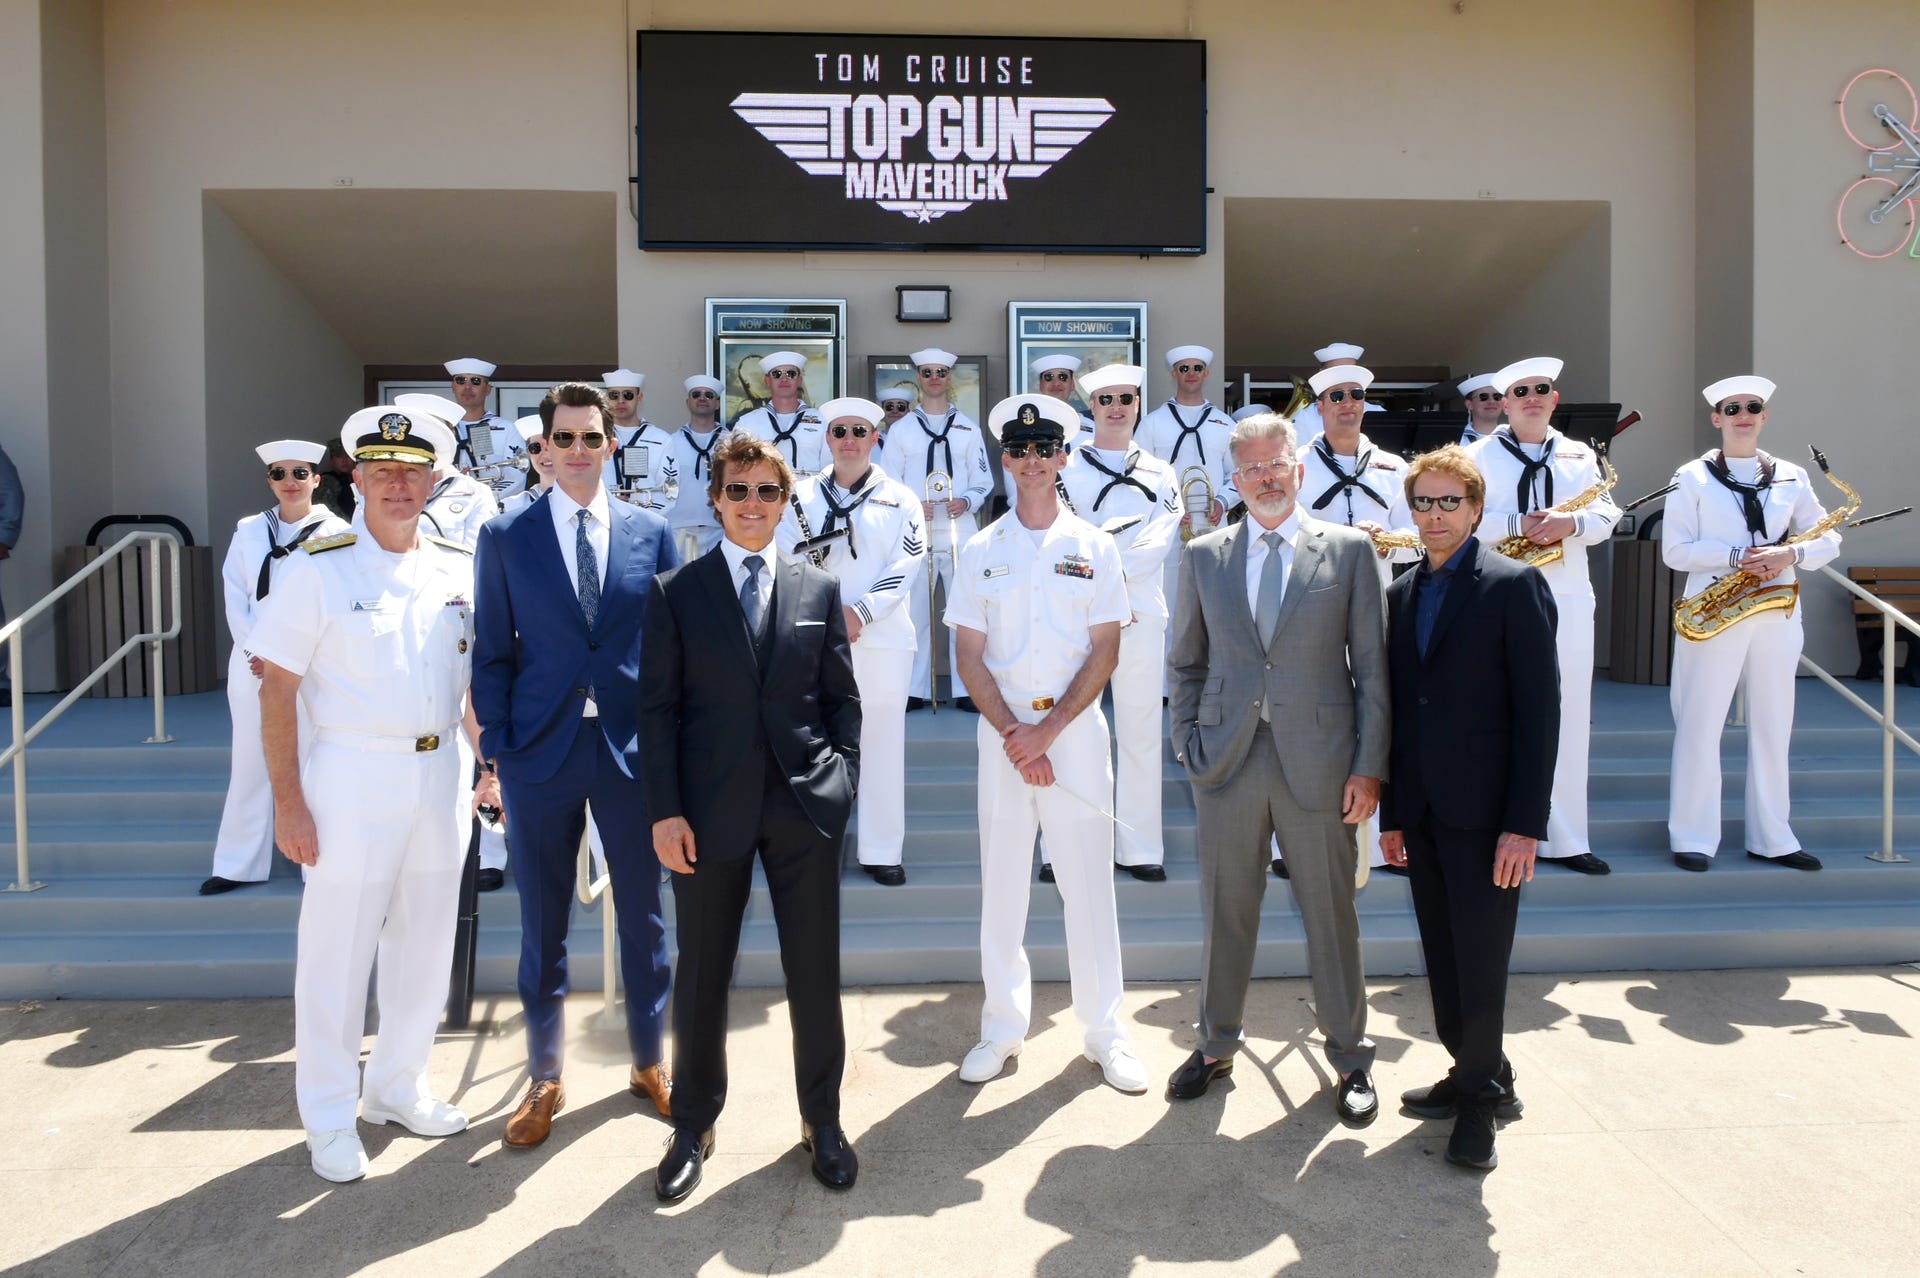 Tom Cruise, Joseph Kosinski, Christopher McQuarrie, Jerry Bruckheimer wear suits and line up with US Navy band members and top brass in gleaming white uniforms under a Top Gun banner.